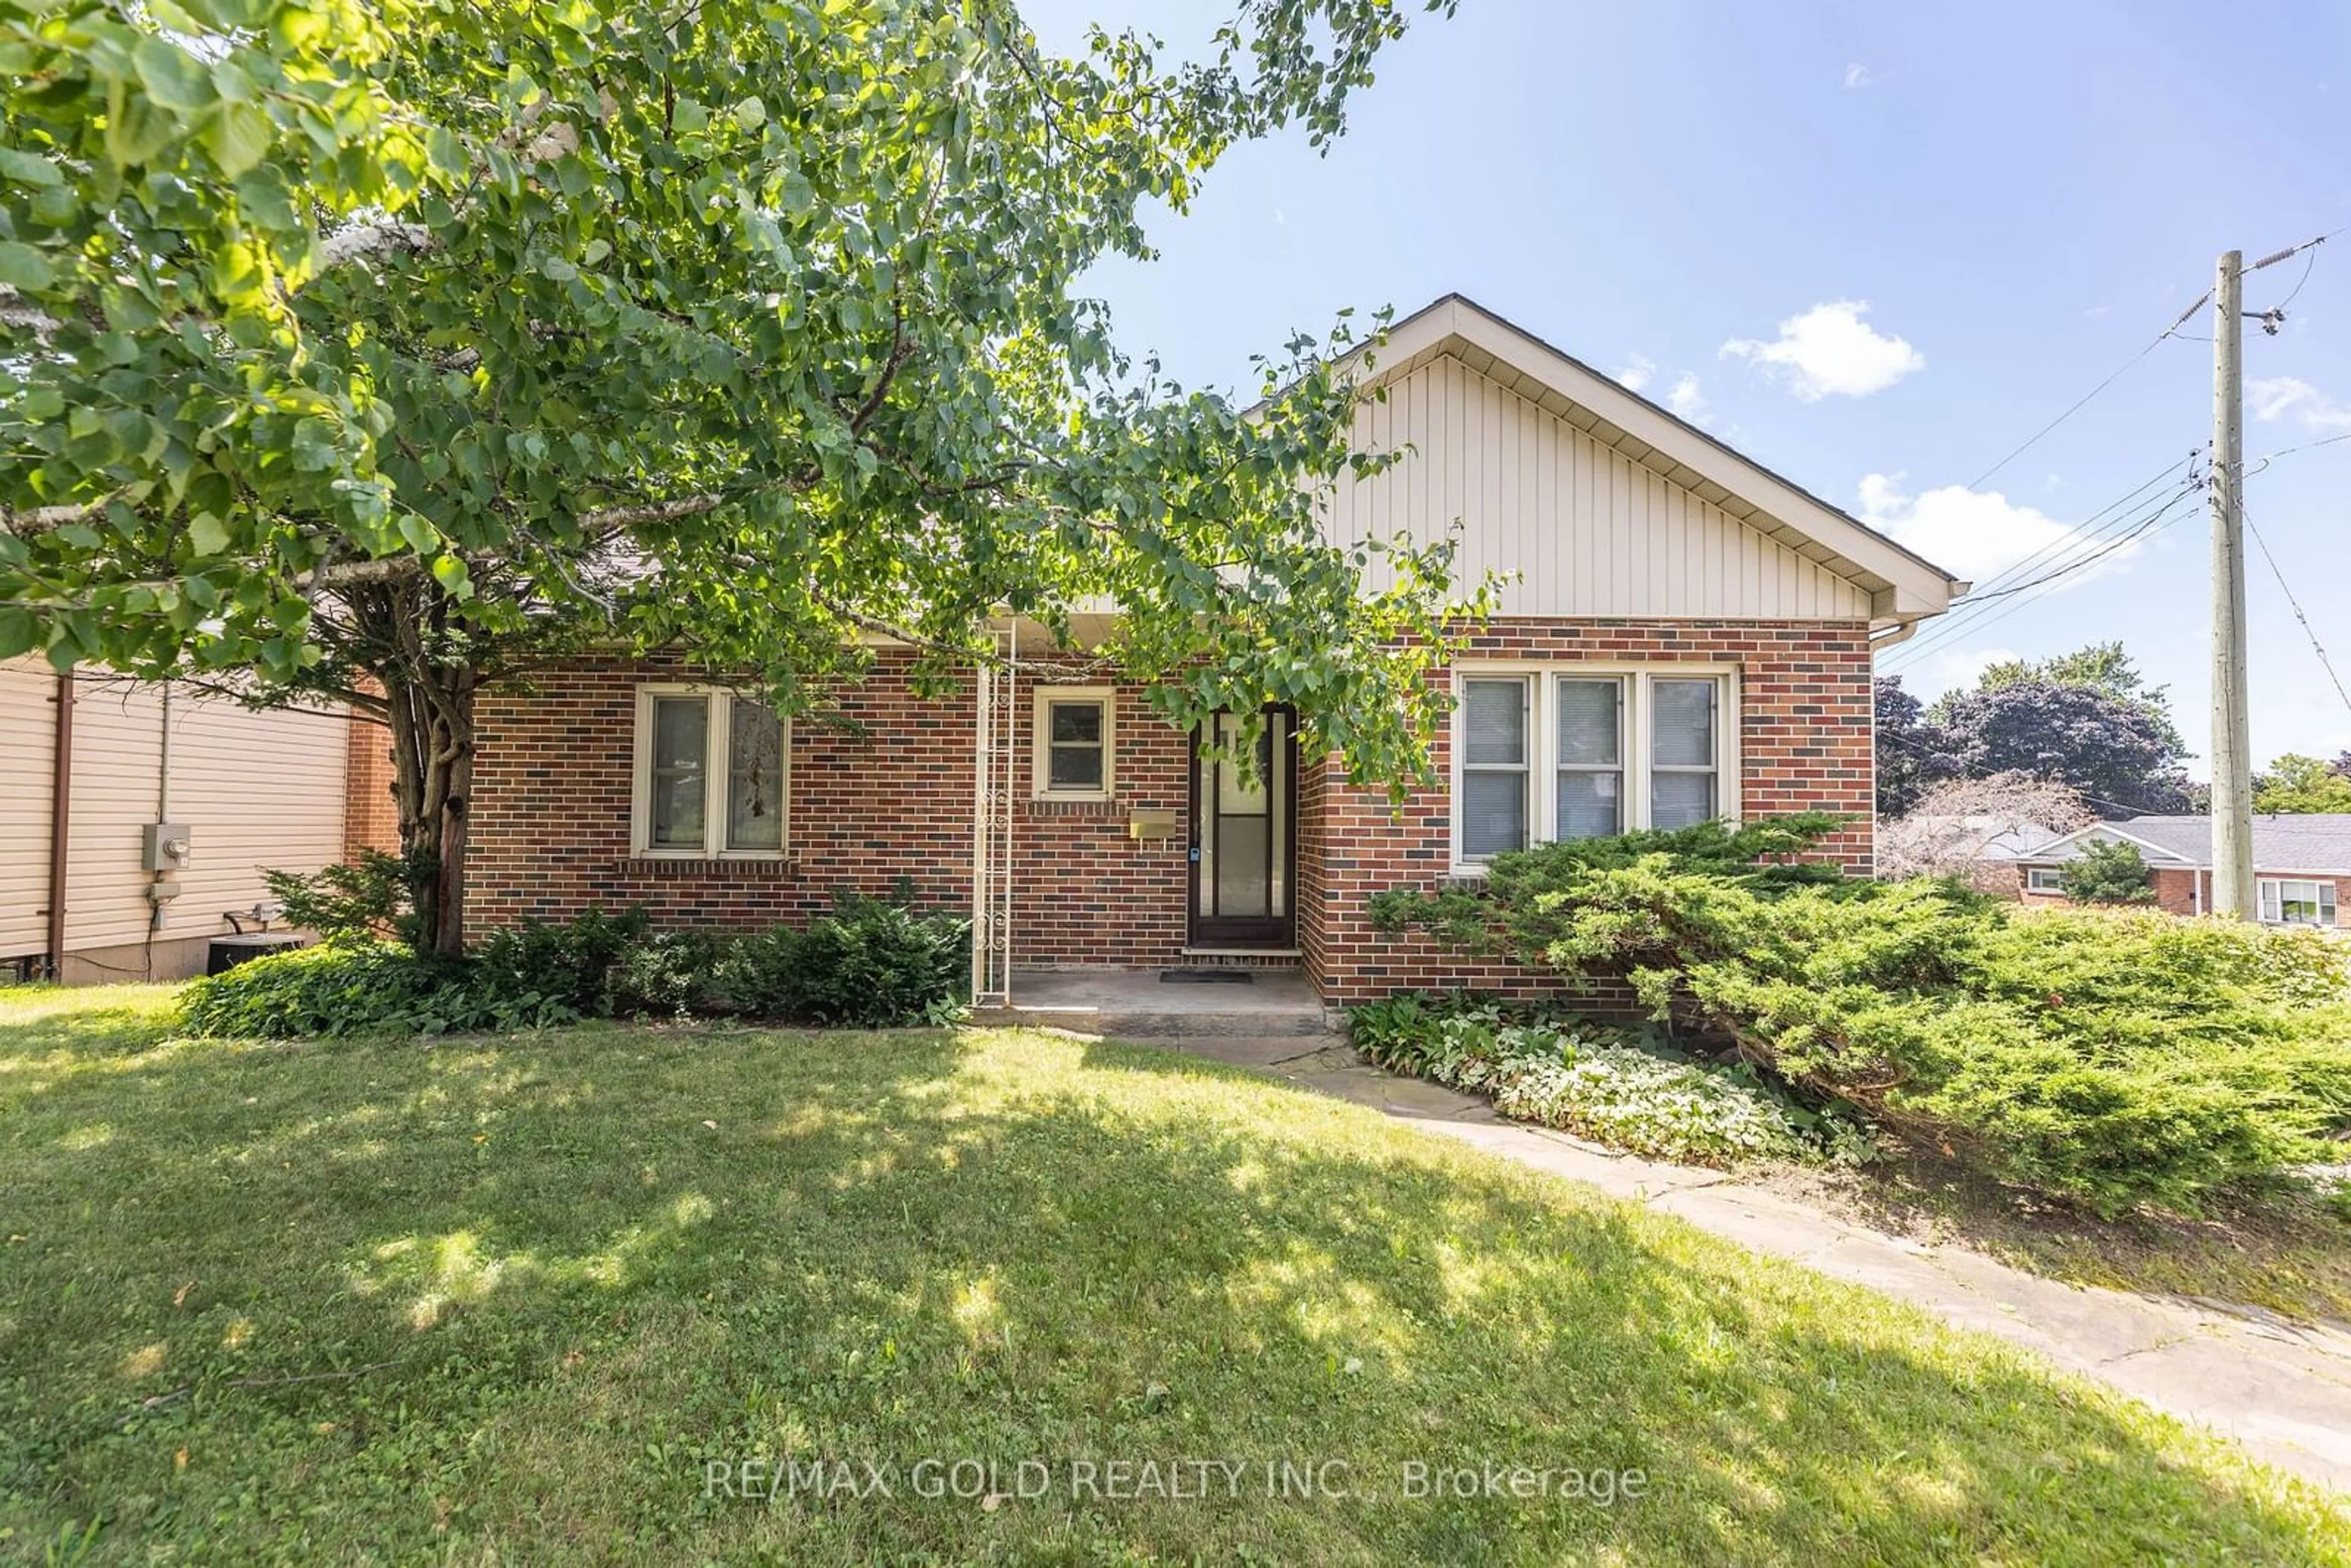 Home with brick exterior material for 174 St. Vincent St, Barrie Ontario L4M 3Y9